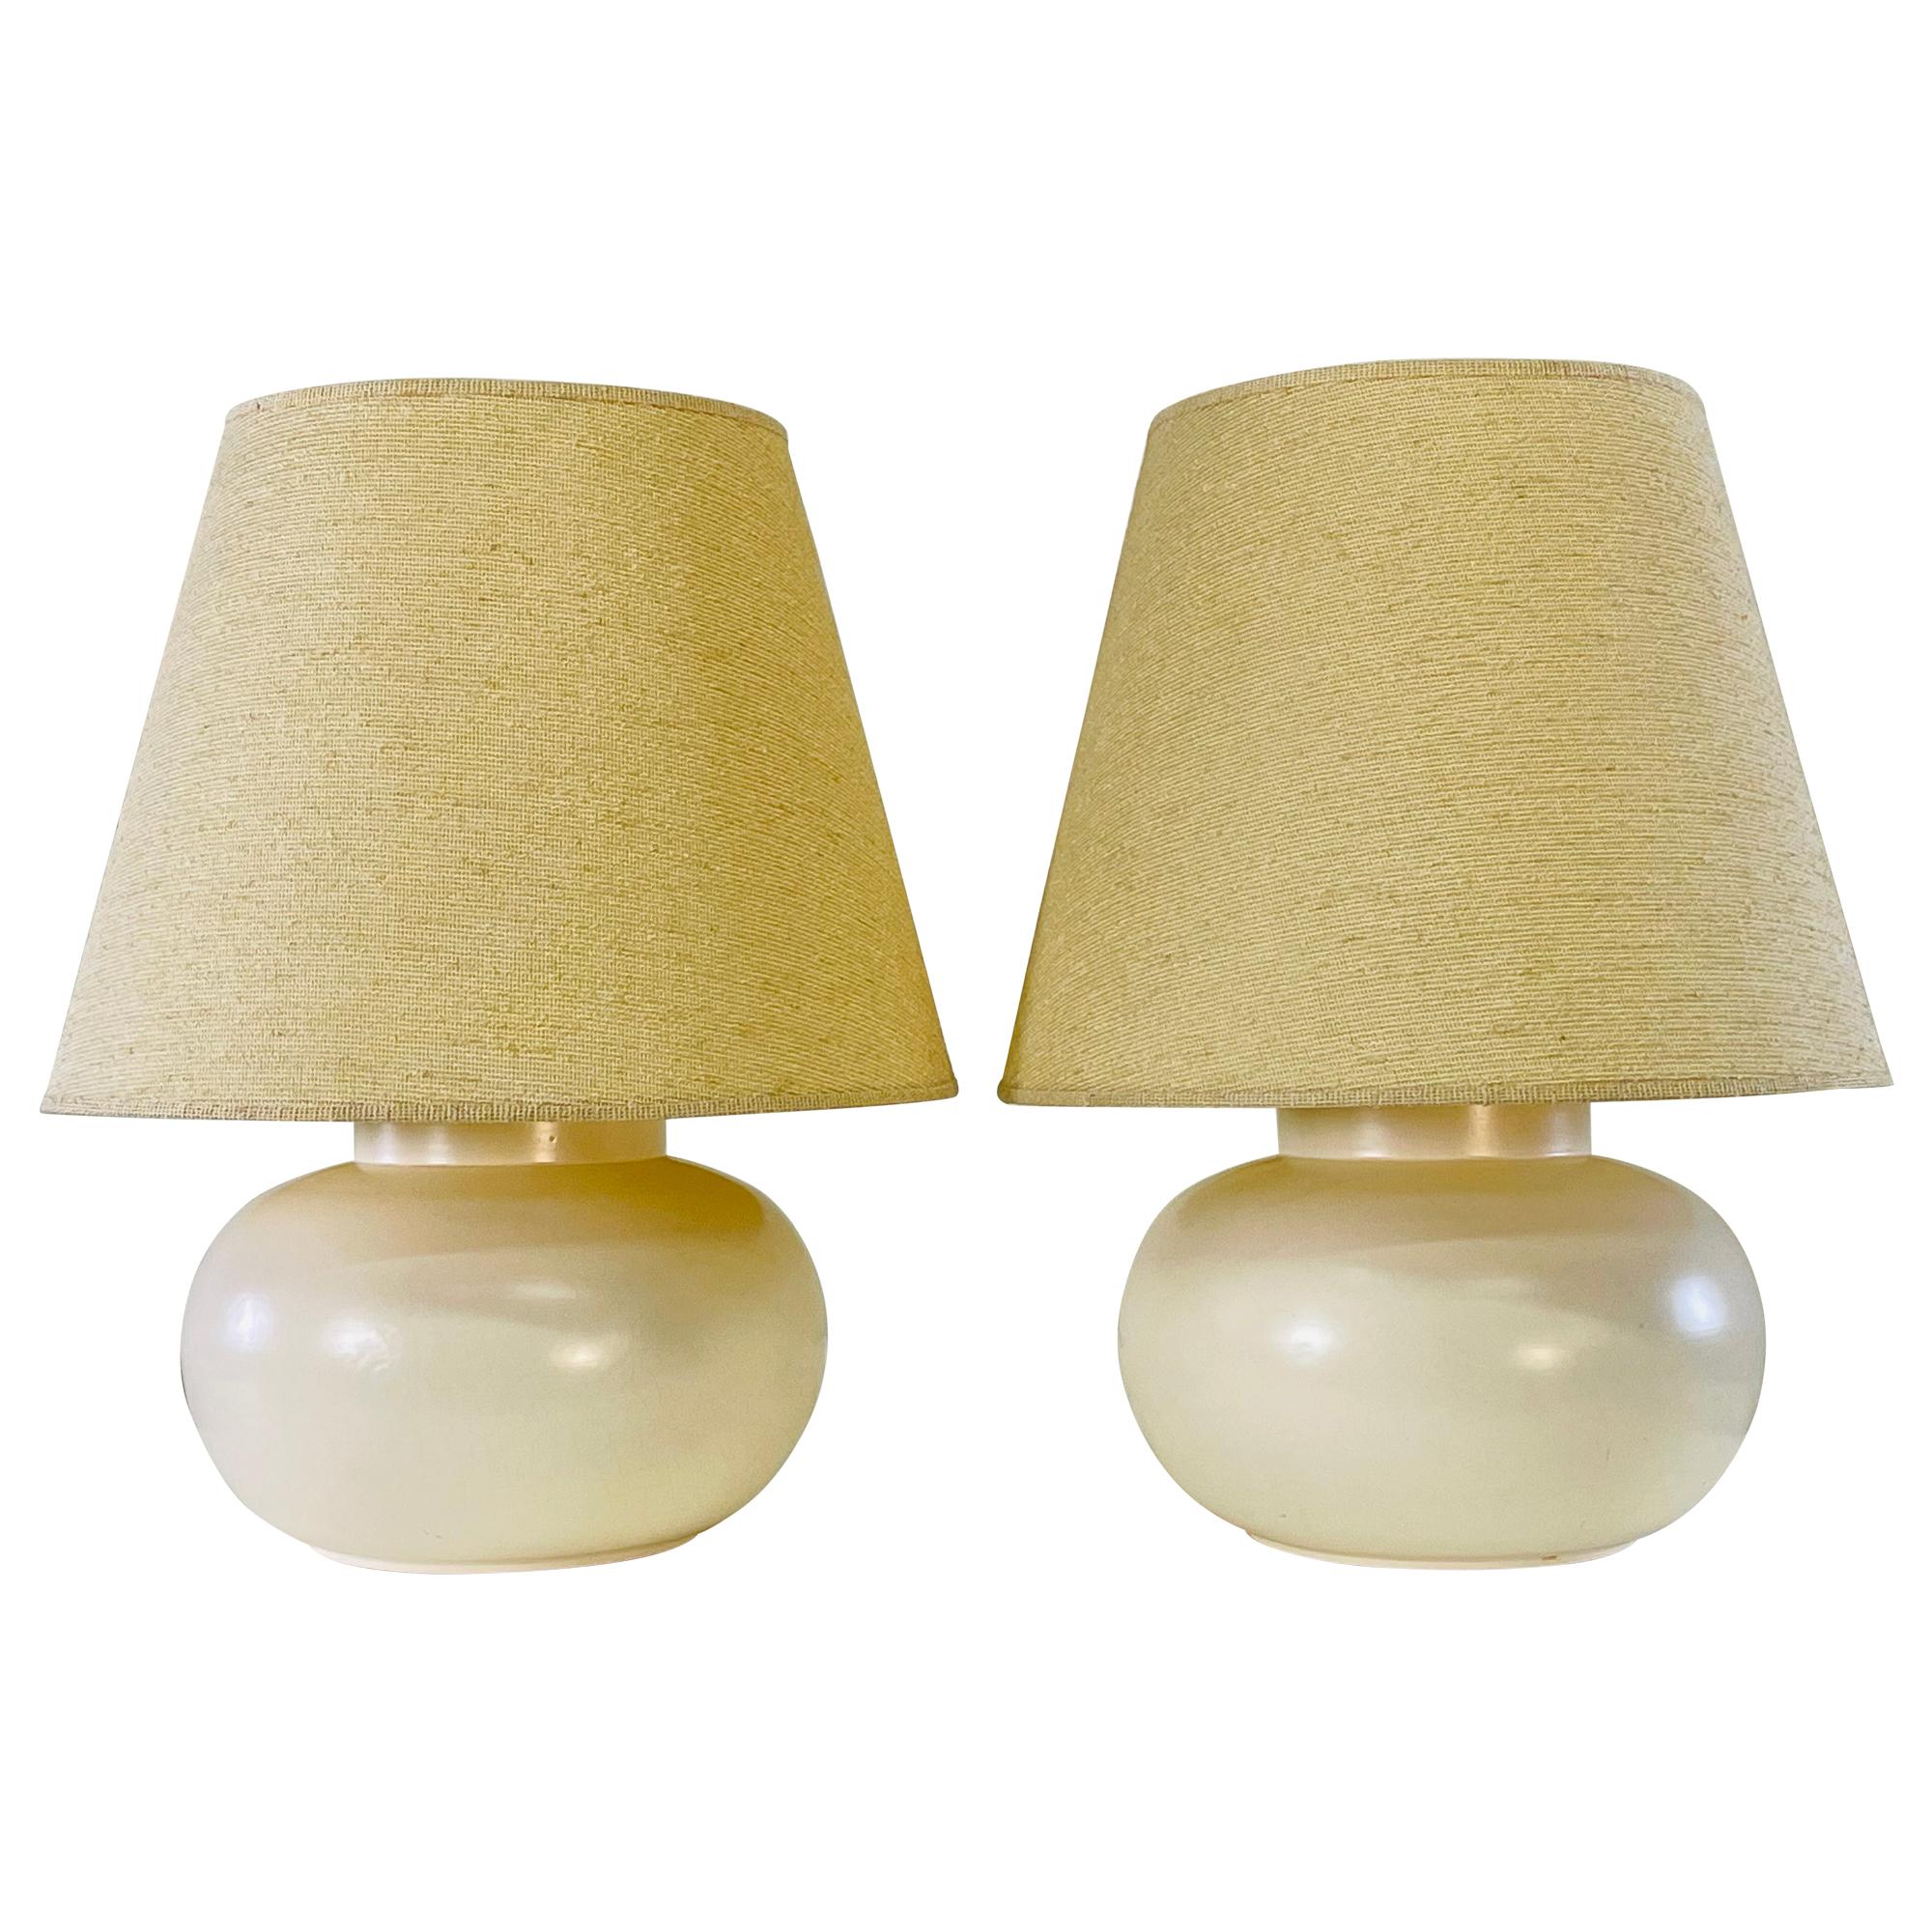 1970s White Bulbous Table Lamps with Shades, Pair For Sale